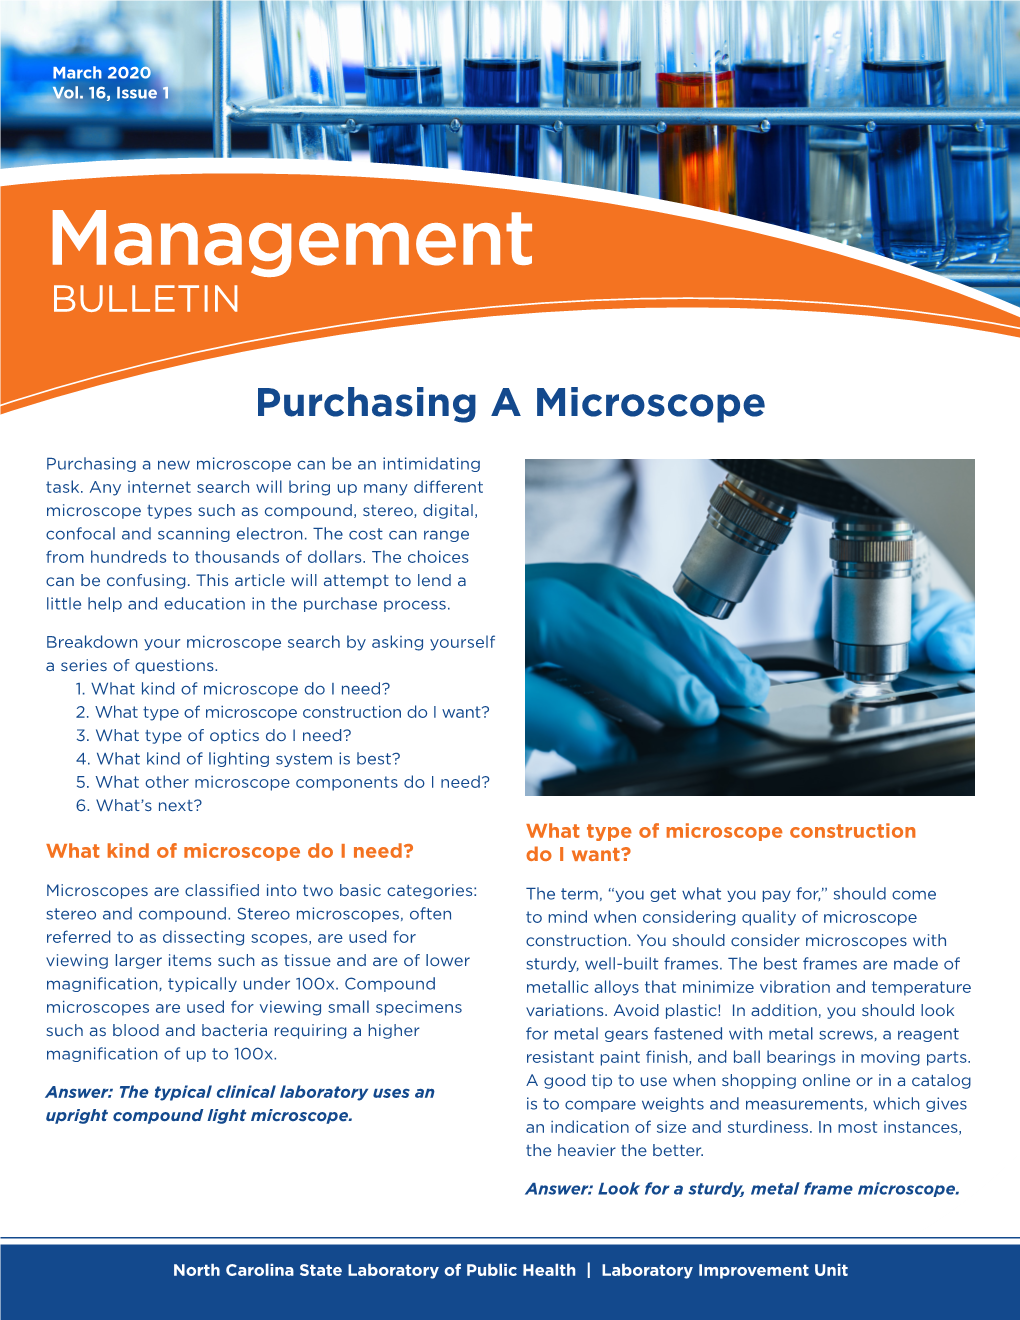 Management Bulletin: Purchasing a Microscope